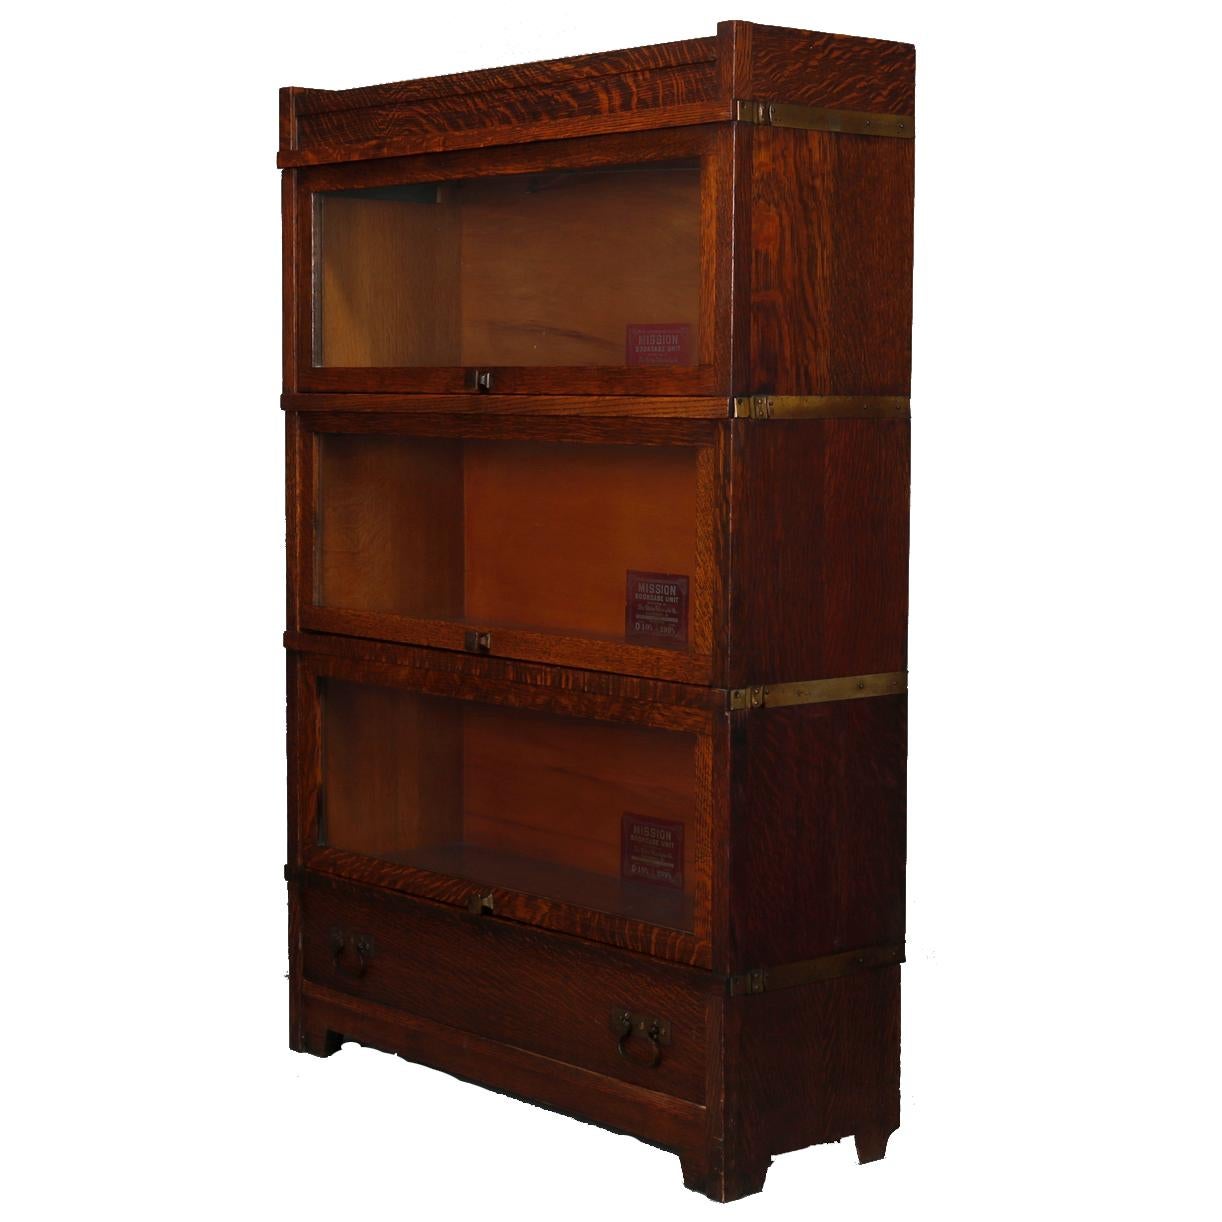 An antique Arts & Crafts Barrister Mission bookcase by Globe Wernicke offers quarter sawn oak construction with three stacks having pull out glass doors with square knobs, raised on straight and square legs, original maker label as photographed,